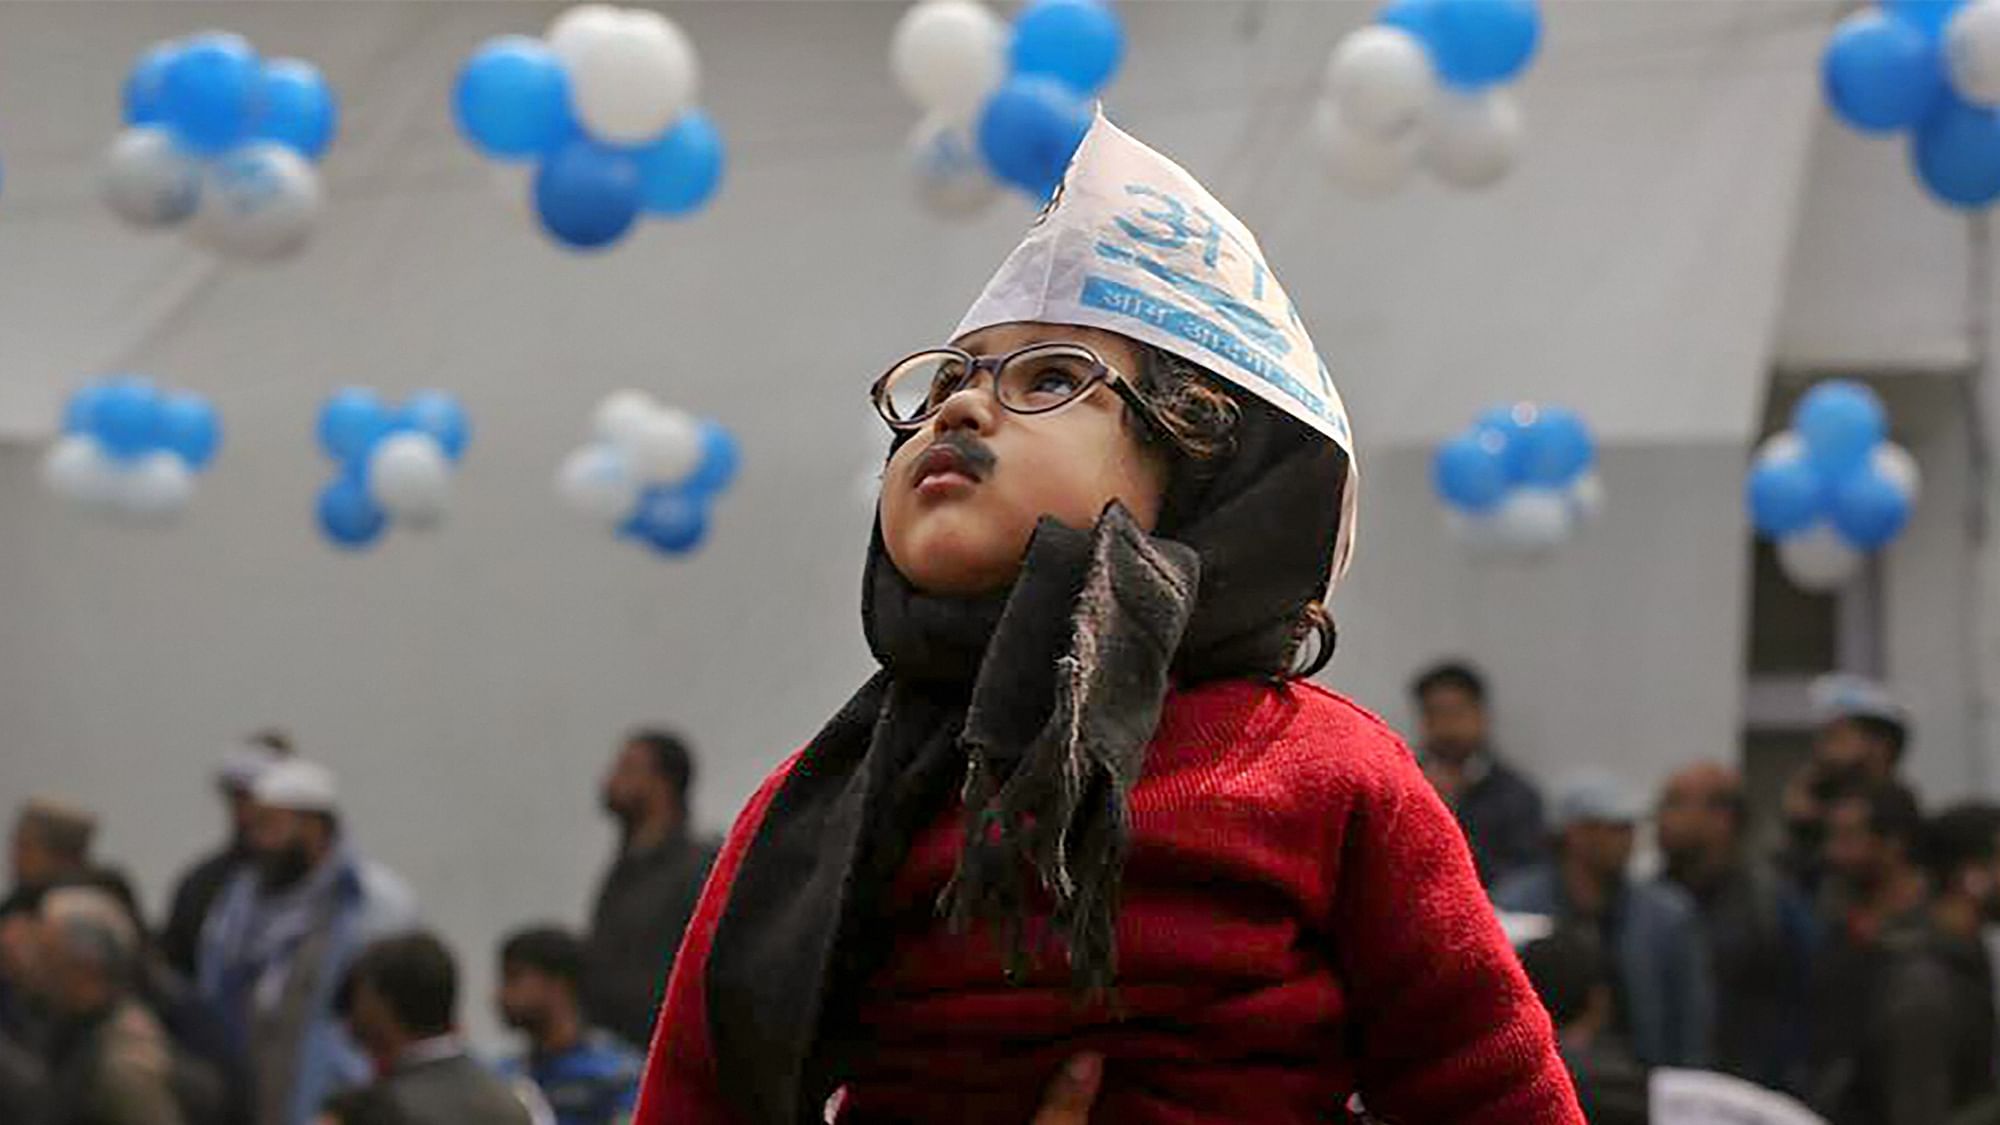  Aam Aadmi Party workers hold a child dressed as AAP convener Arvind Kejriwal as they celebrate the party’s victory in the Delhi Assembly polls, at party headquarters in New Delhi, on Tuesday, 11 February.&nbsp;